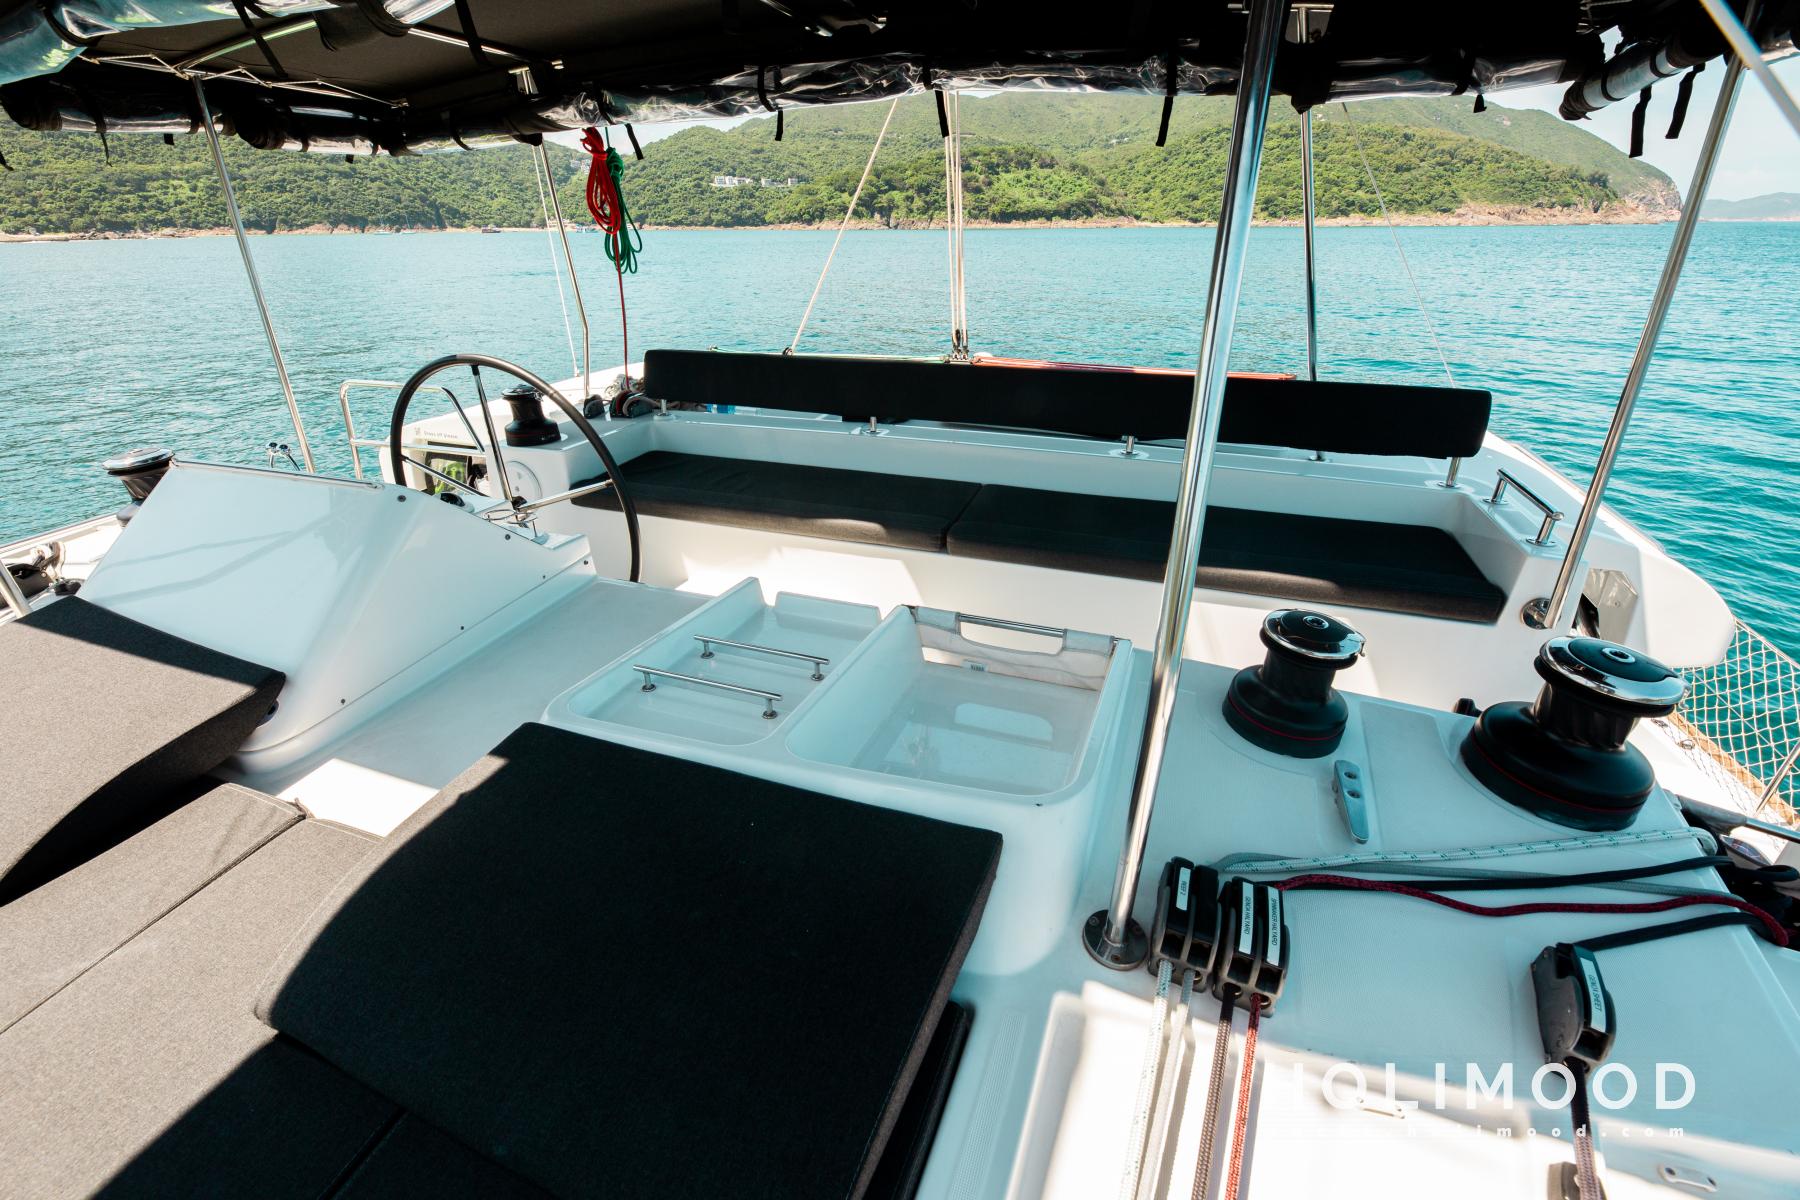 SL01 48-Hour Upgraded Luxury Catamaran Sailing Voyage, an unforgettable 3 days and 2 nights sea experience 13